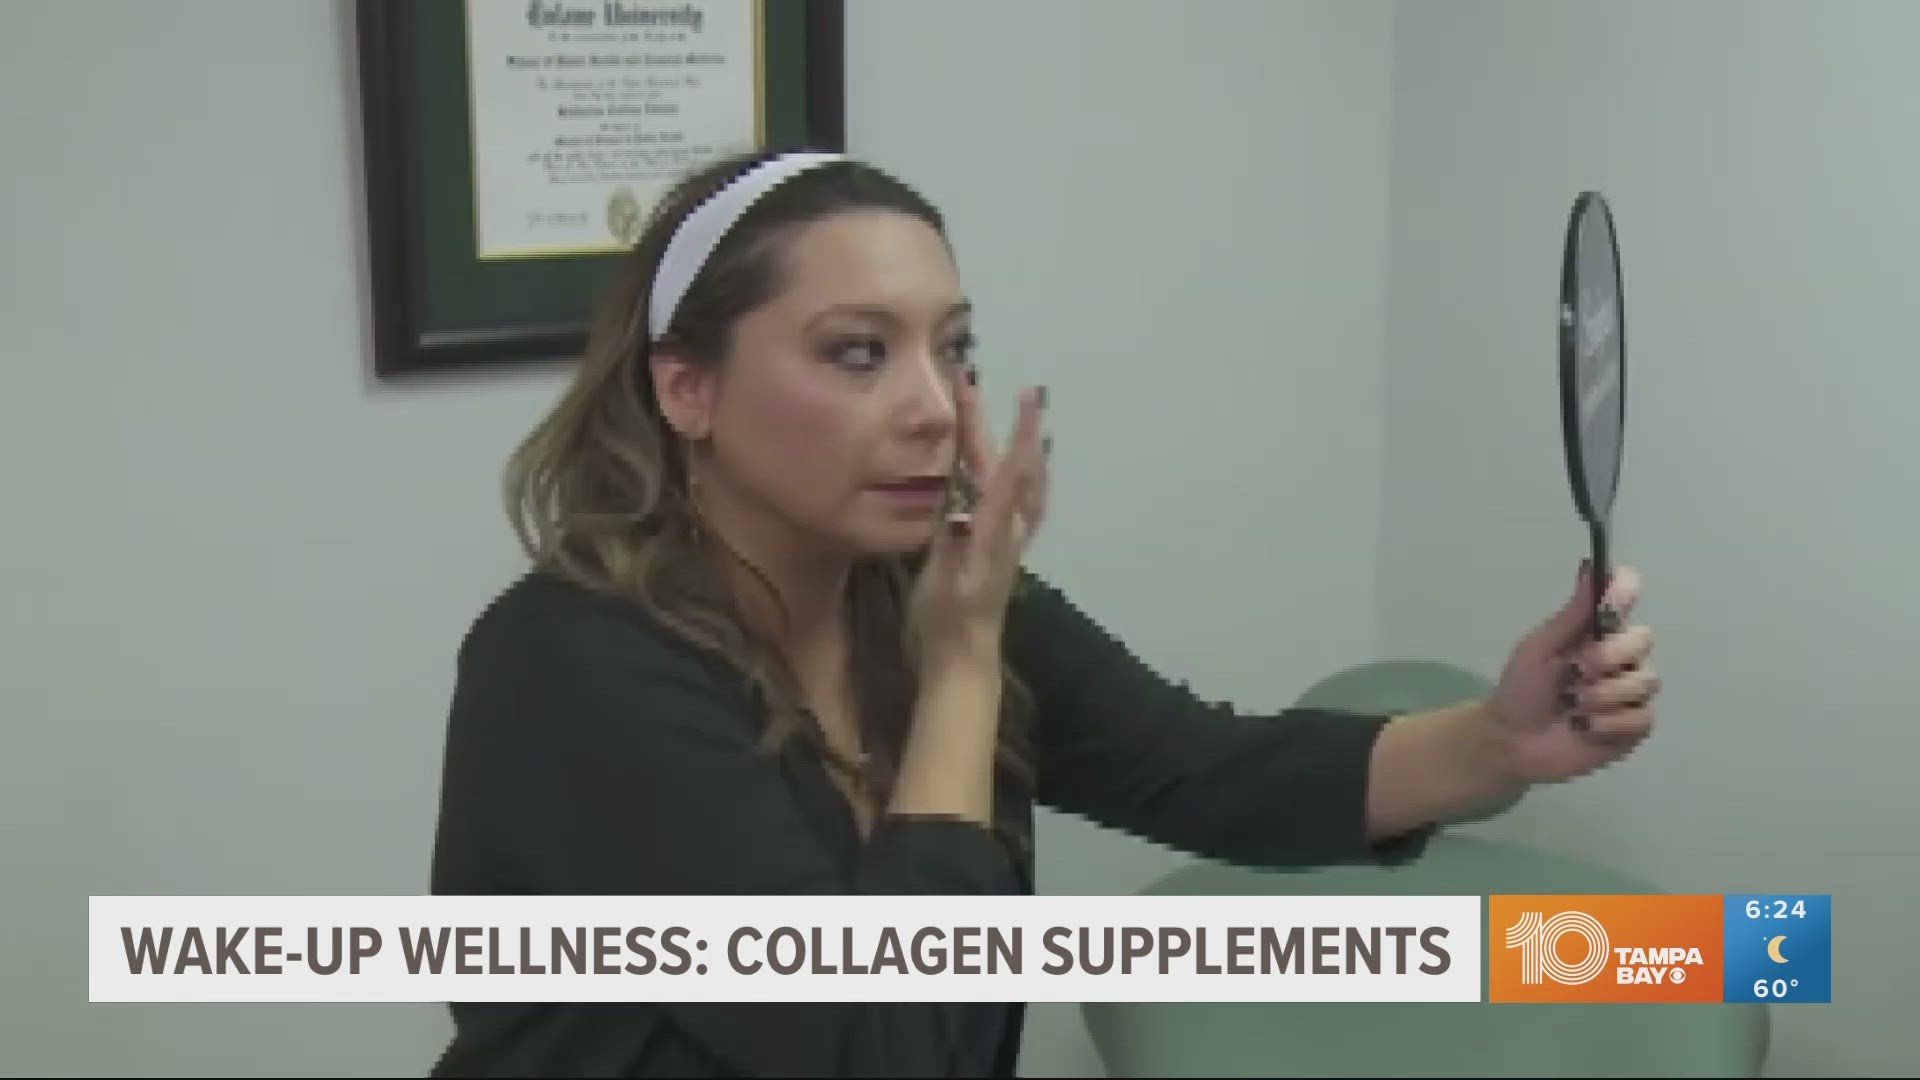 Those collagen supplements you're taking aren't doing the job you think they are, a dermatologist says. But there are ways to help build it back.